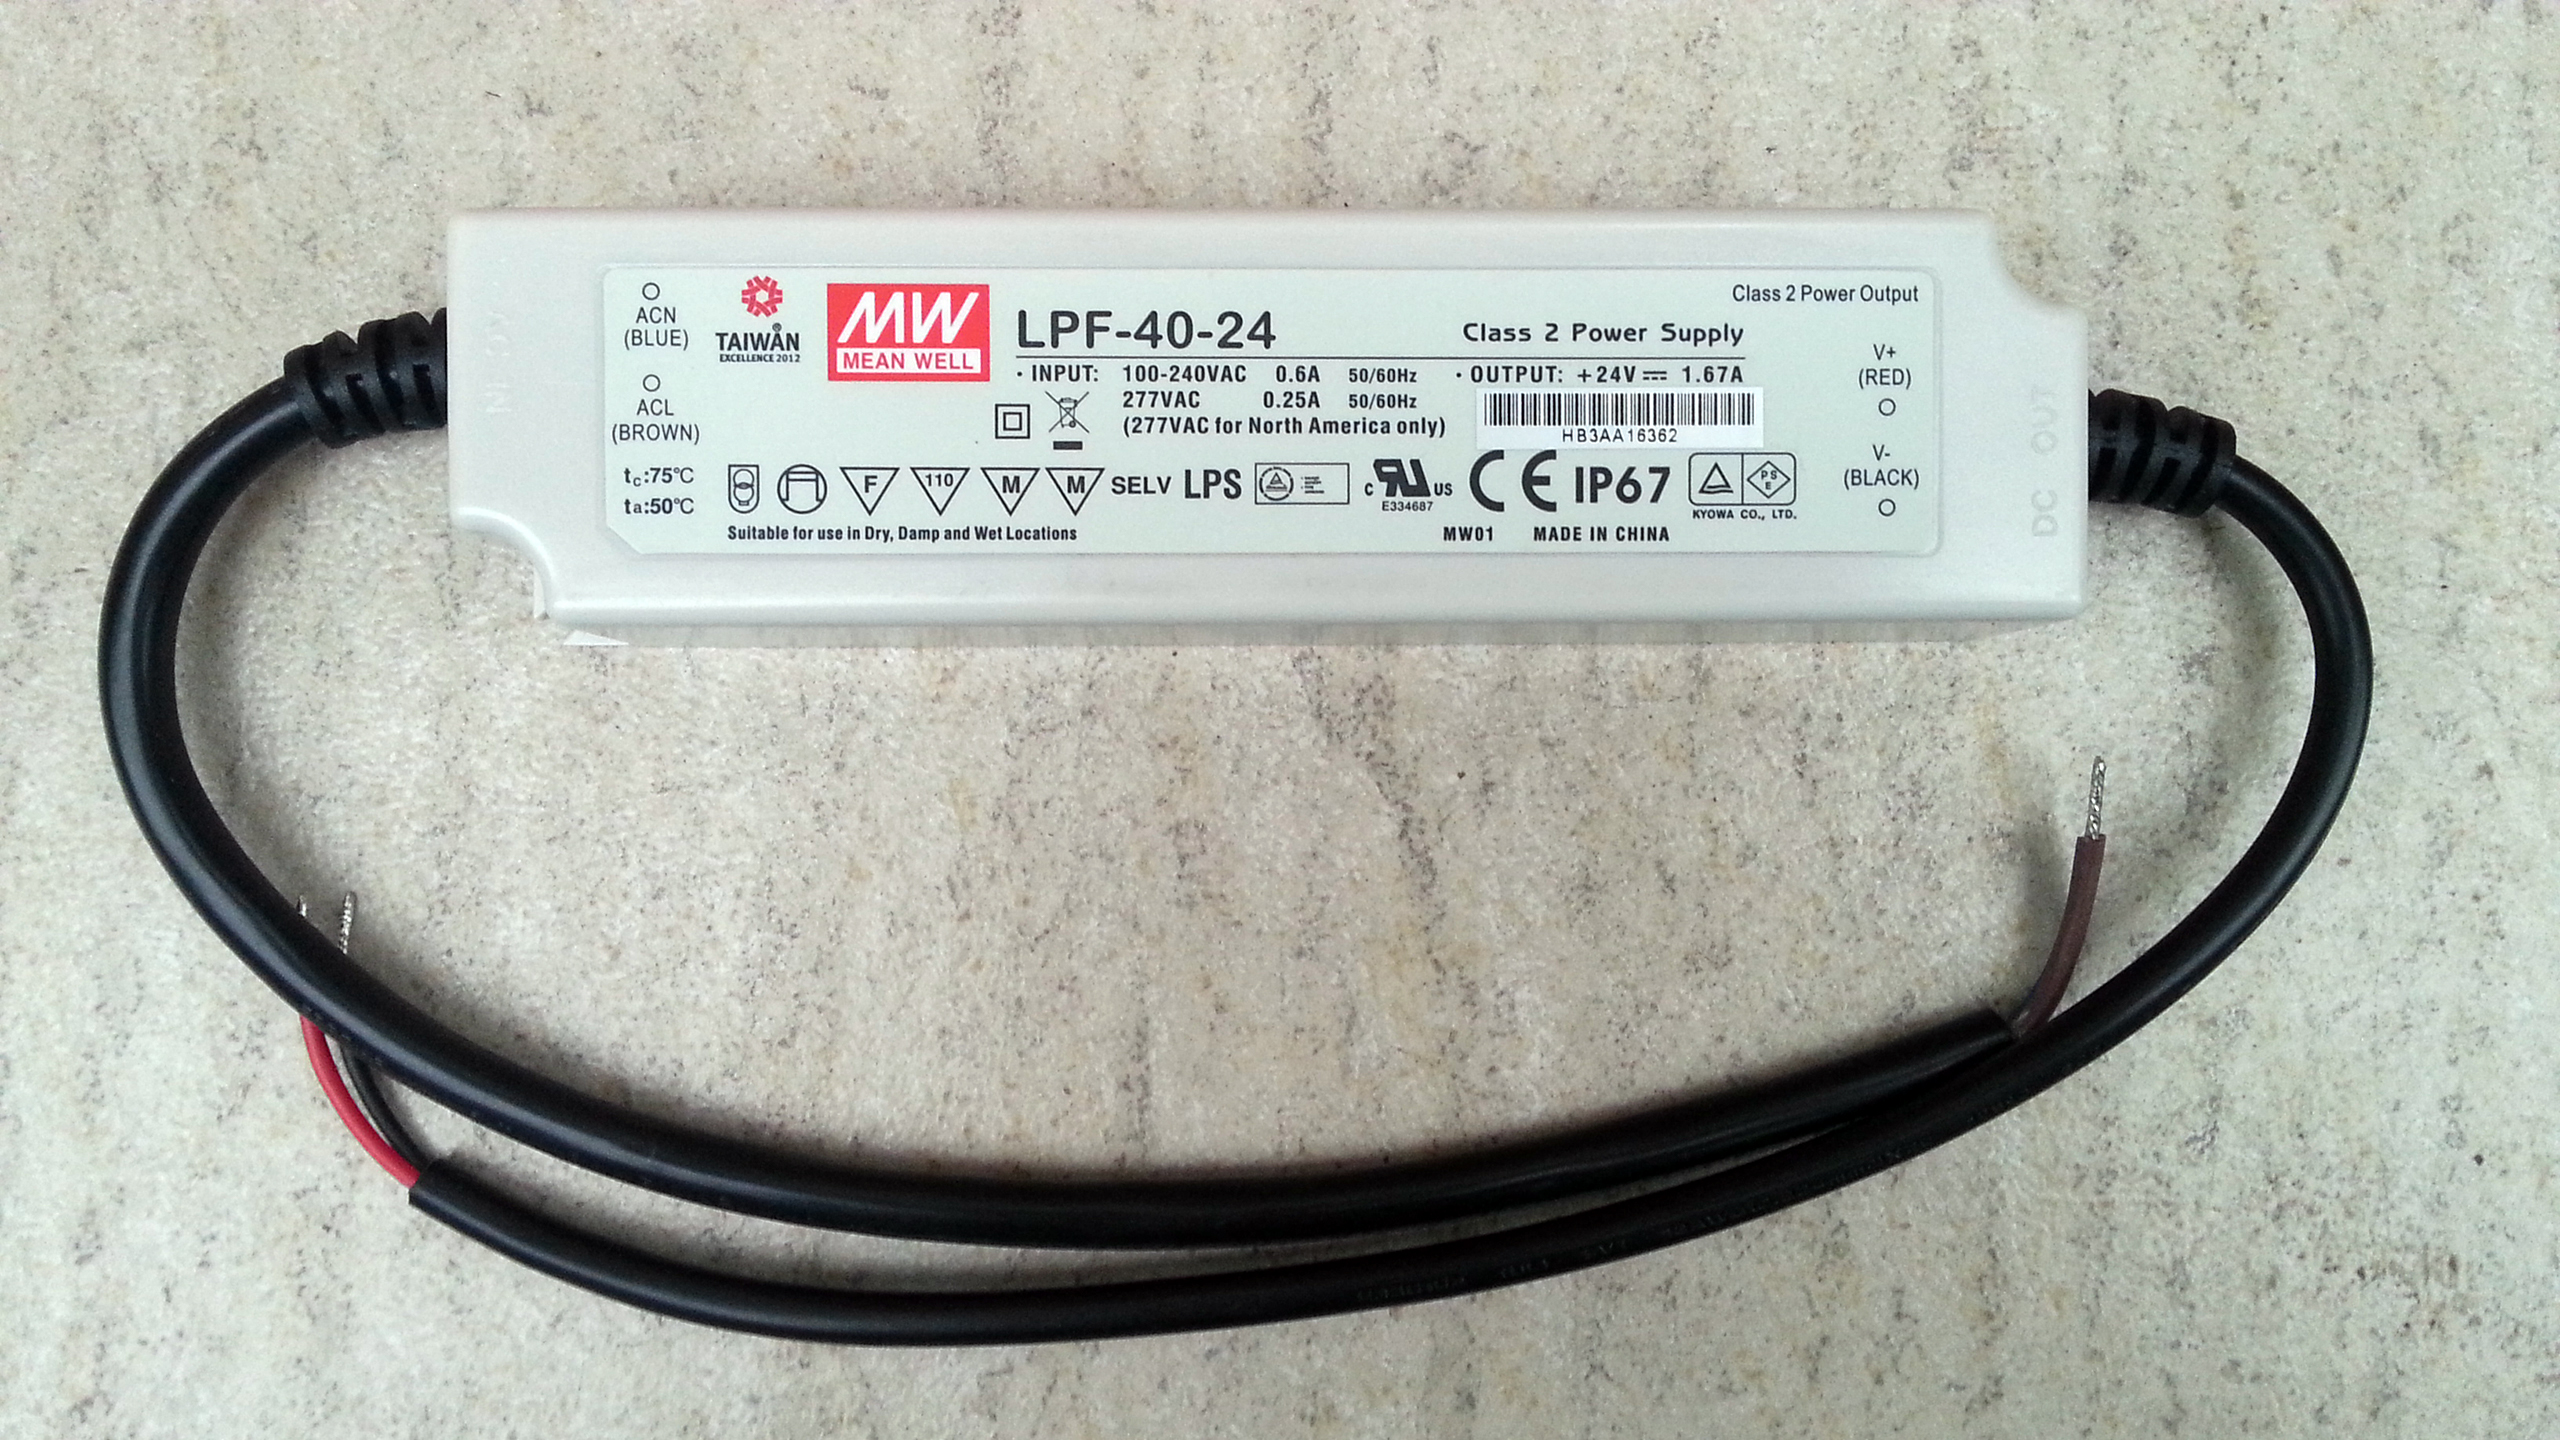 Meanwell_LPD_40_24_waterproof_LED_driver_power_supply